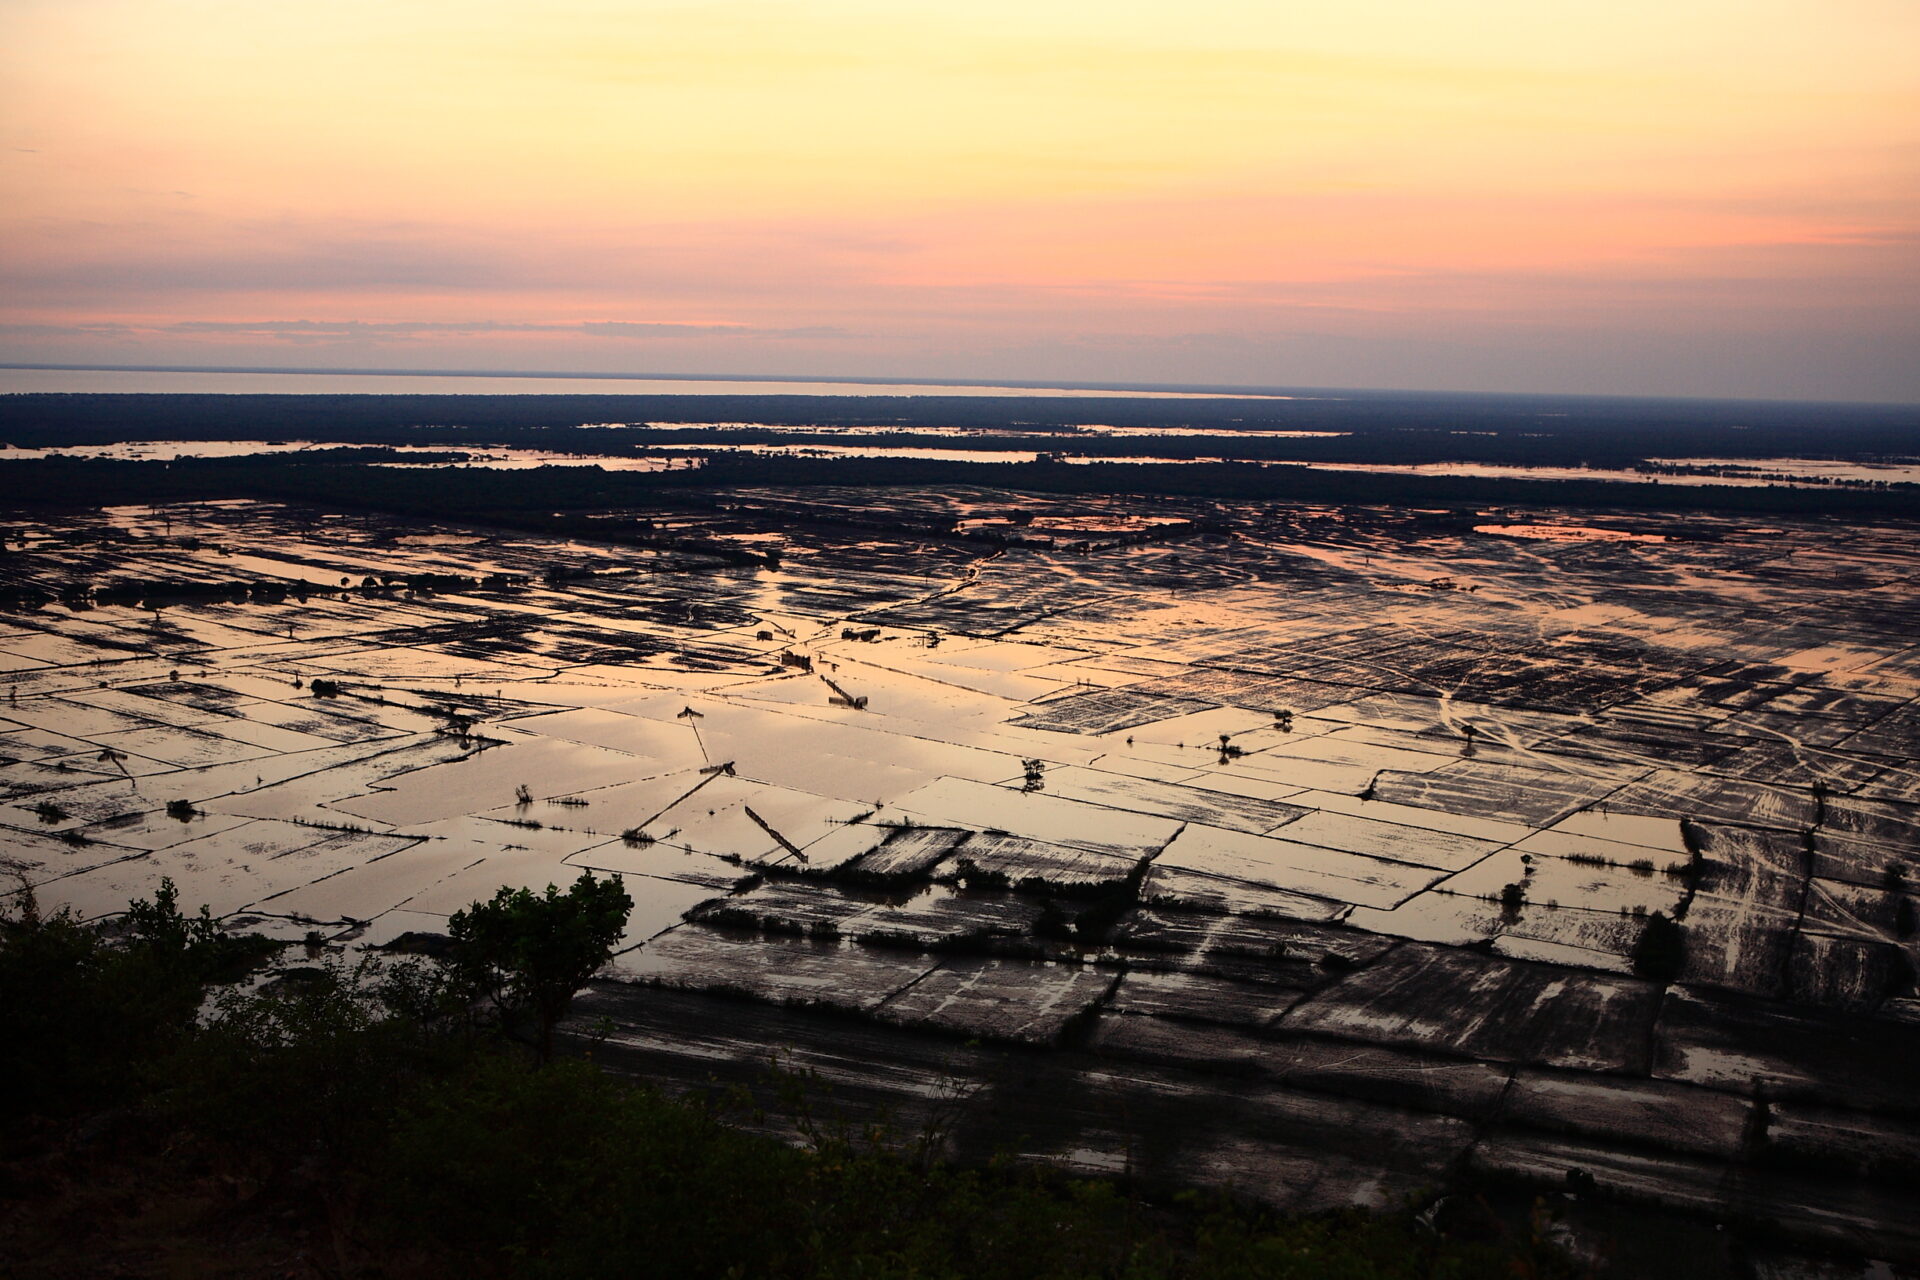 Dawn breaks over the rice paddy fields in the Mekong delta